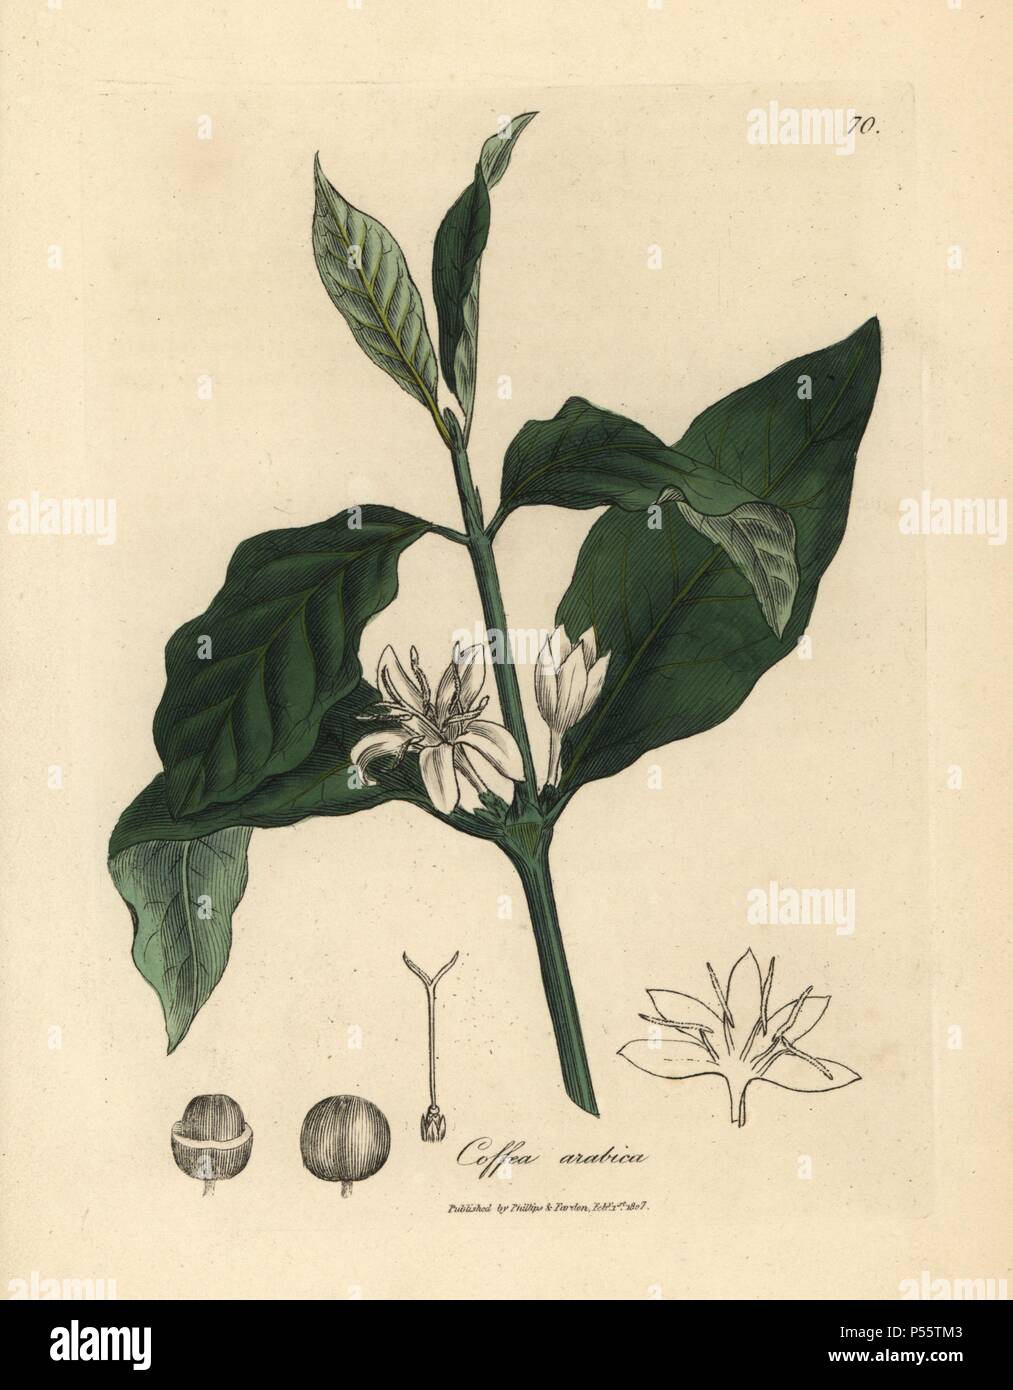 White flower, leaves and bean of the coffee plant, Coffea arabica. Handcolored copperplate engraving from a botanical illustration by James Sowerby from William Woodville and Sir William Jackson Hooker's 'Medical Botany' 1832. The tireless Sowerby (1757-1822) drew over 2,500 plants for Smith's mammoth 'English Botany' (1790-1814) and 440 mushrooms for 'Coloured Figures of English Fungi ' (1797) among many other works. Stock Photo